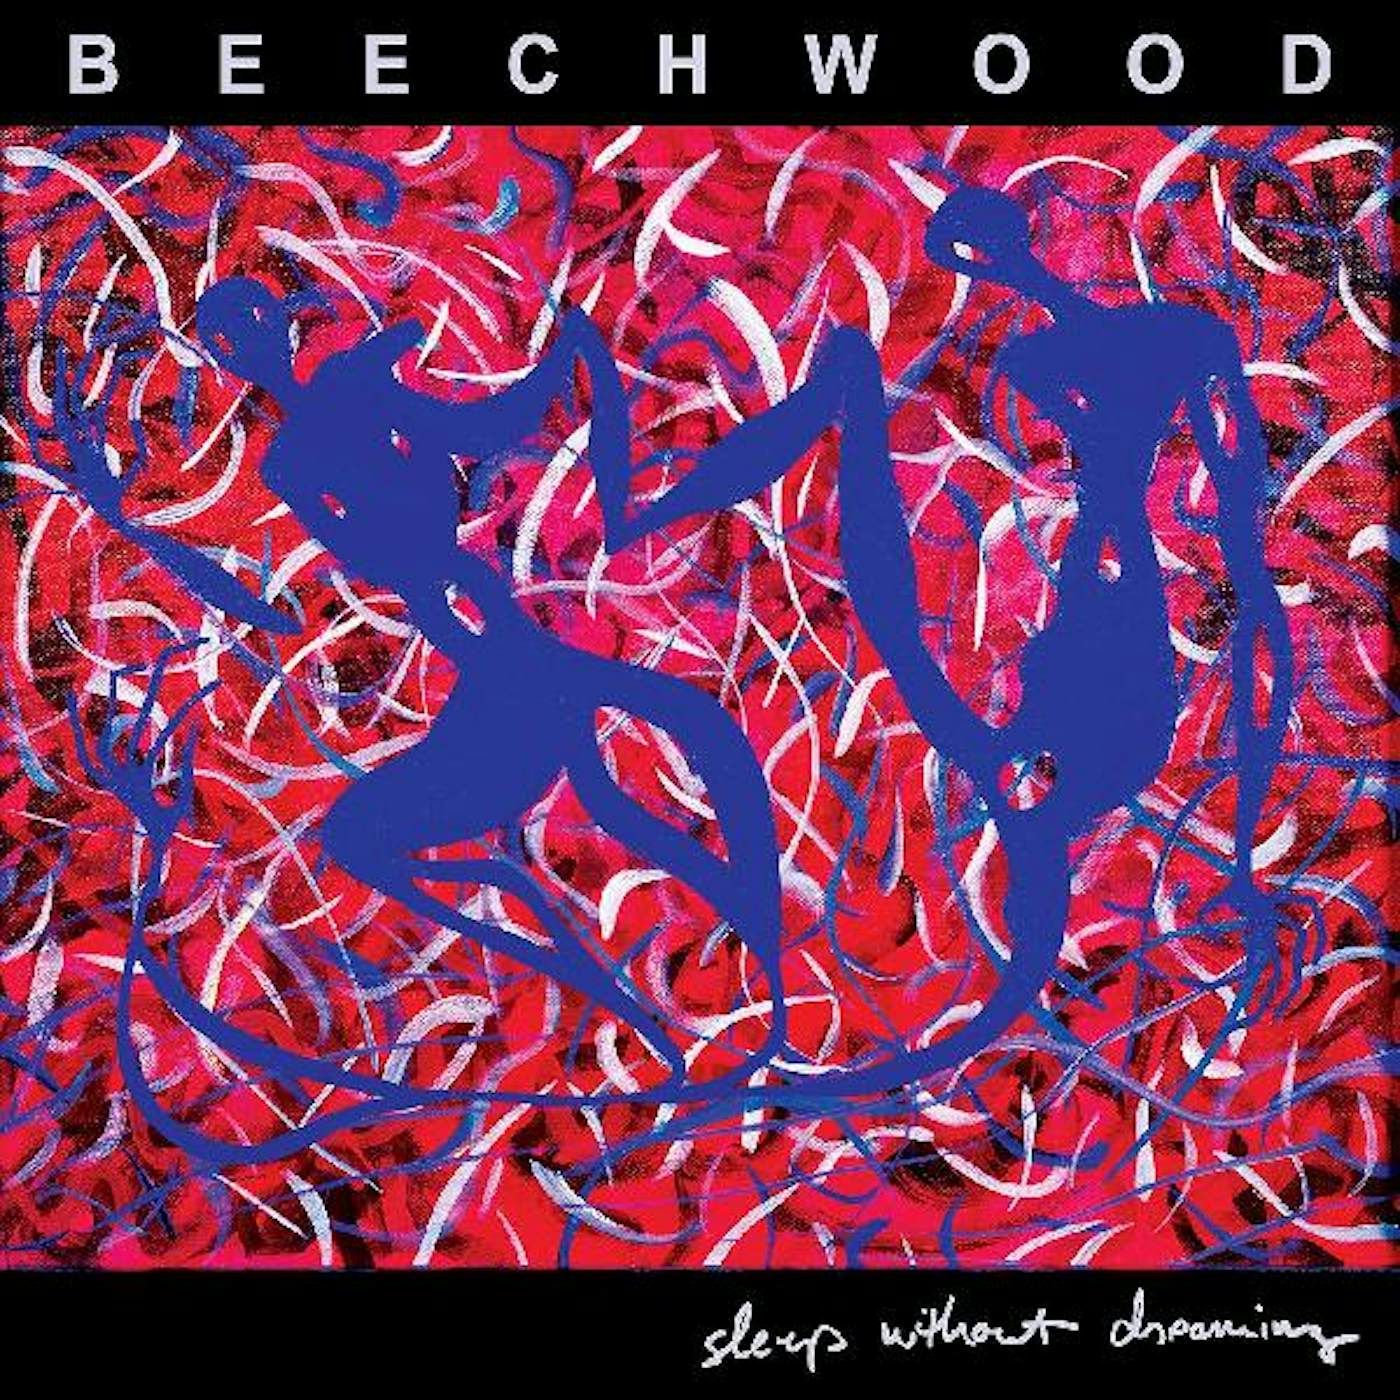 Beechwood SLEEP WITHOUT DREAMING (LIMITED EDITION/CLEAR RED VINYL) Vinyl Record